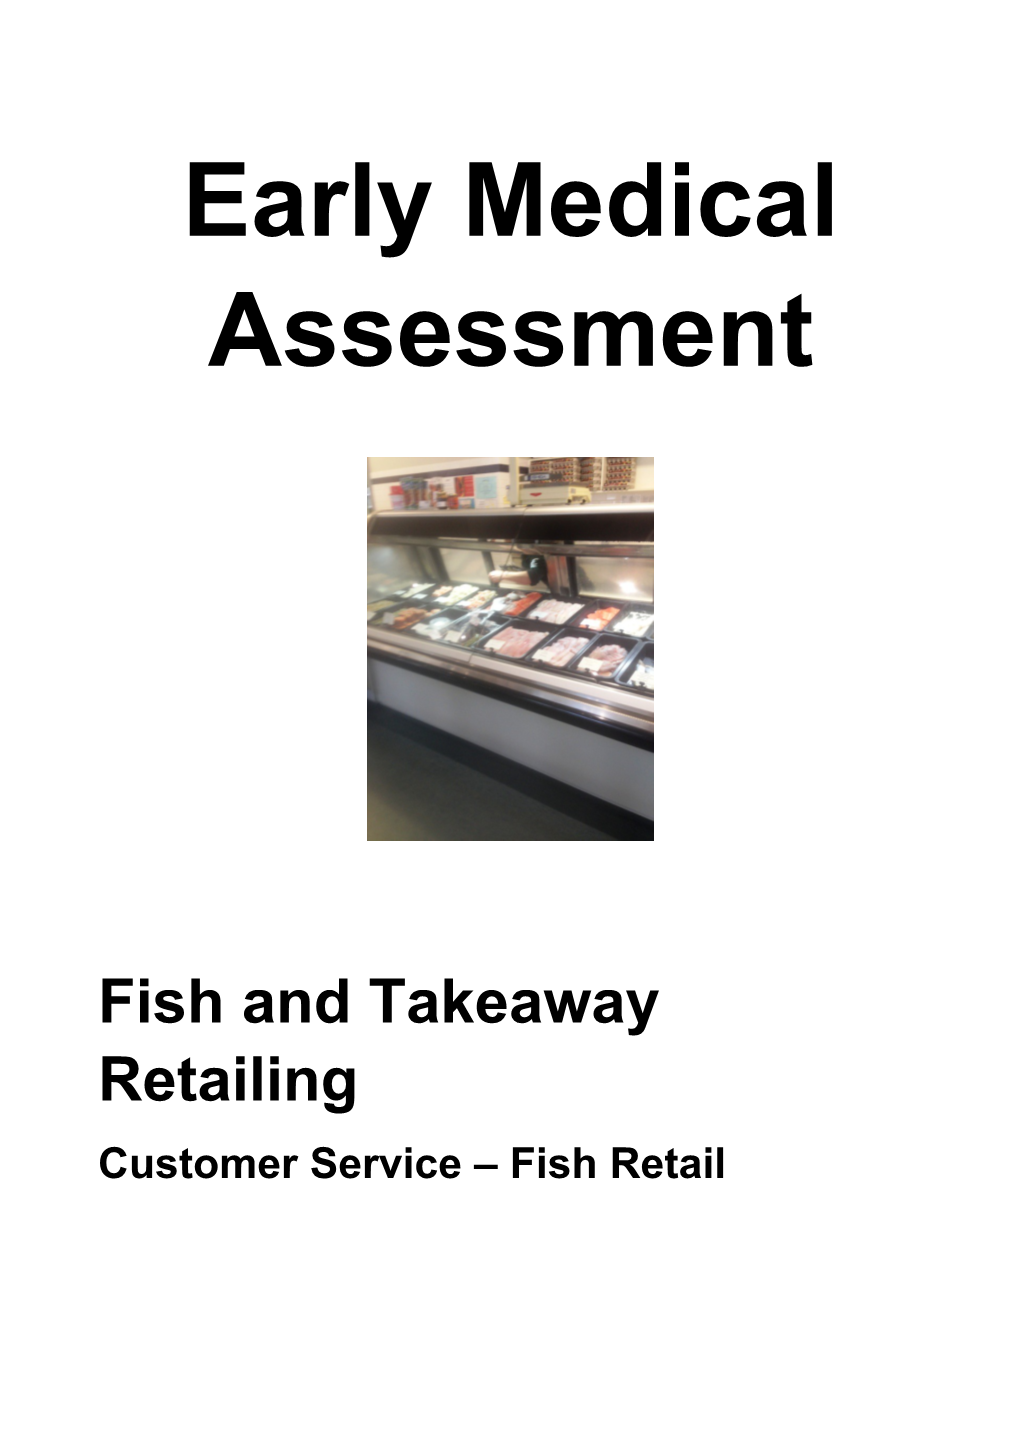 Fish and Takeaway Retailing - Customer Service 2